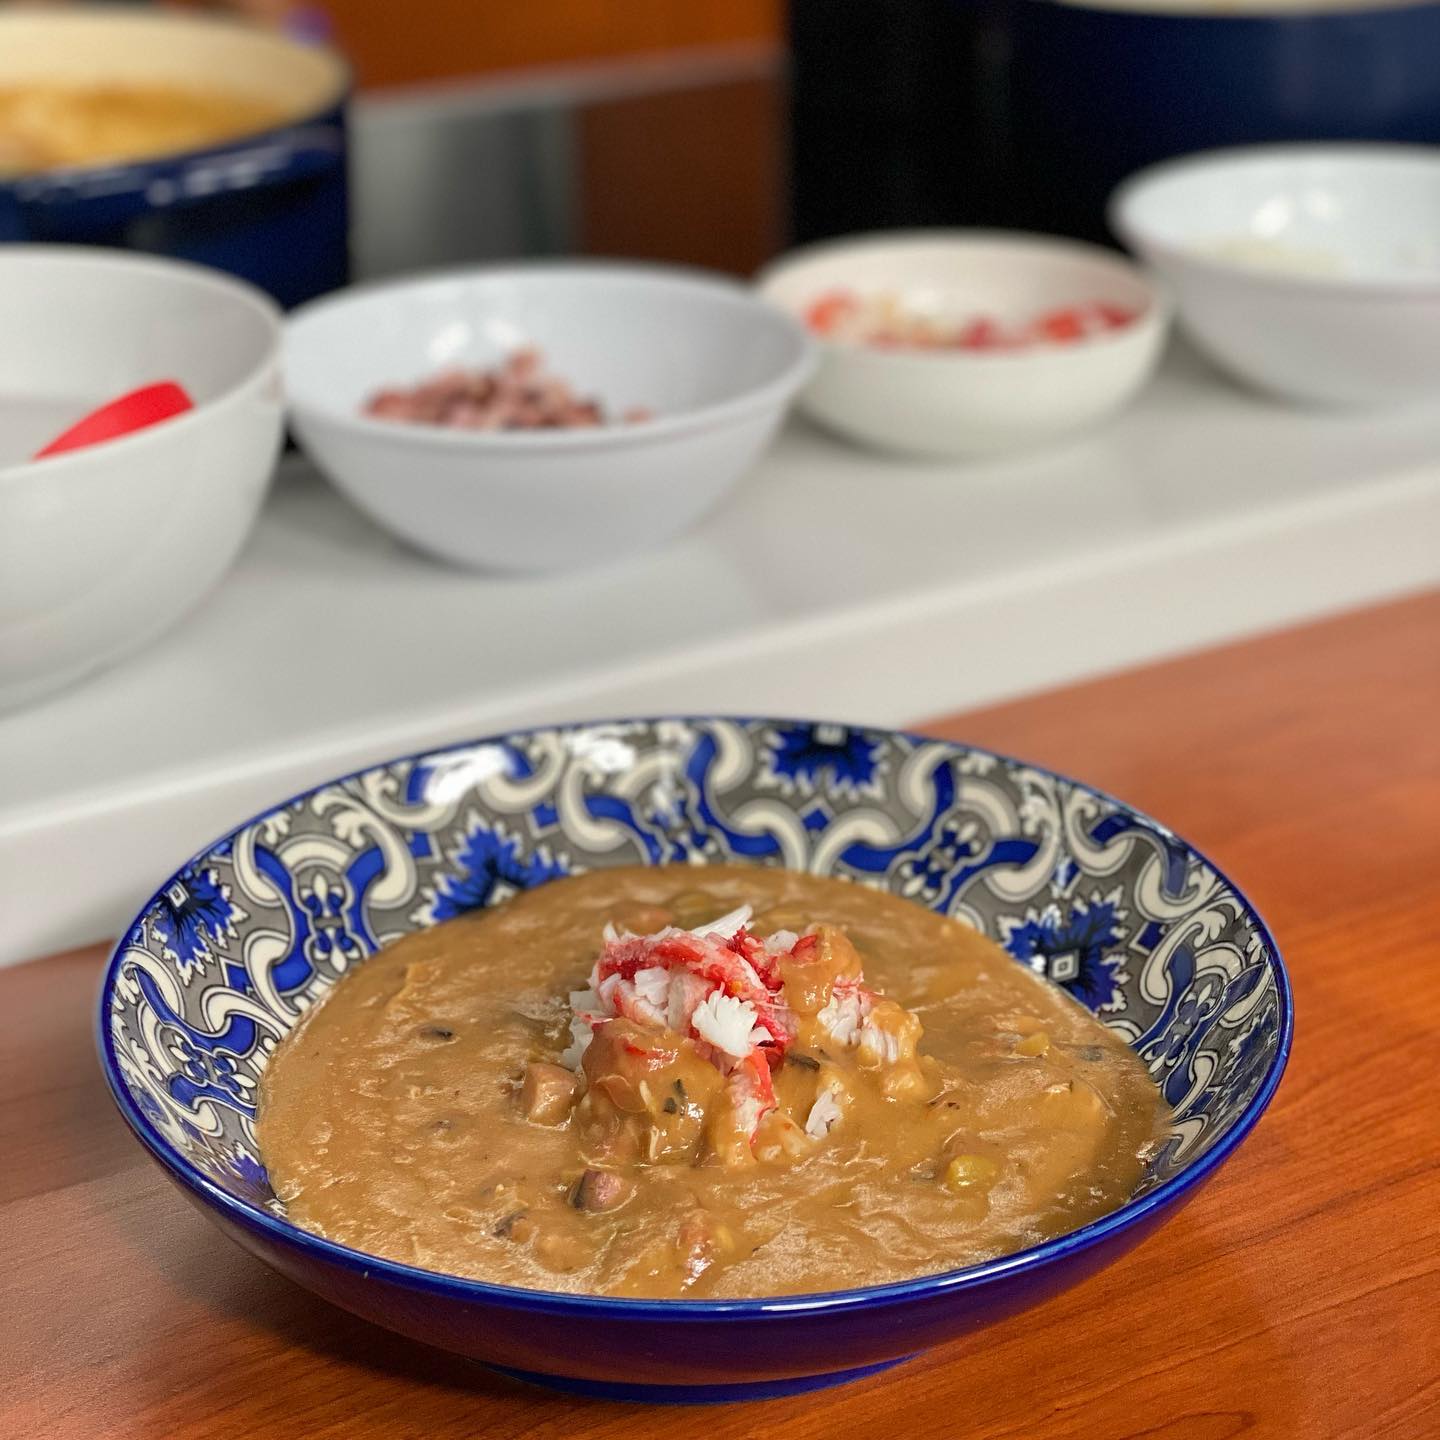 Chicago crab and pork belly gumbo Photo via @wgnnews